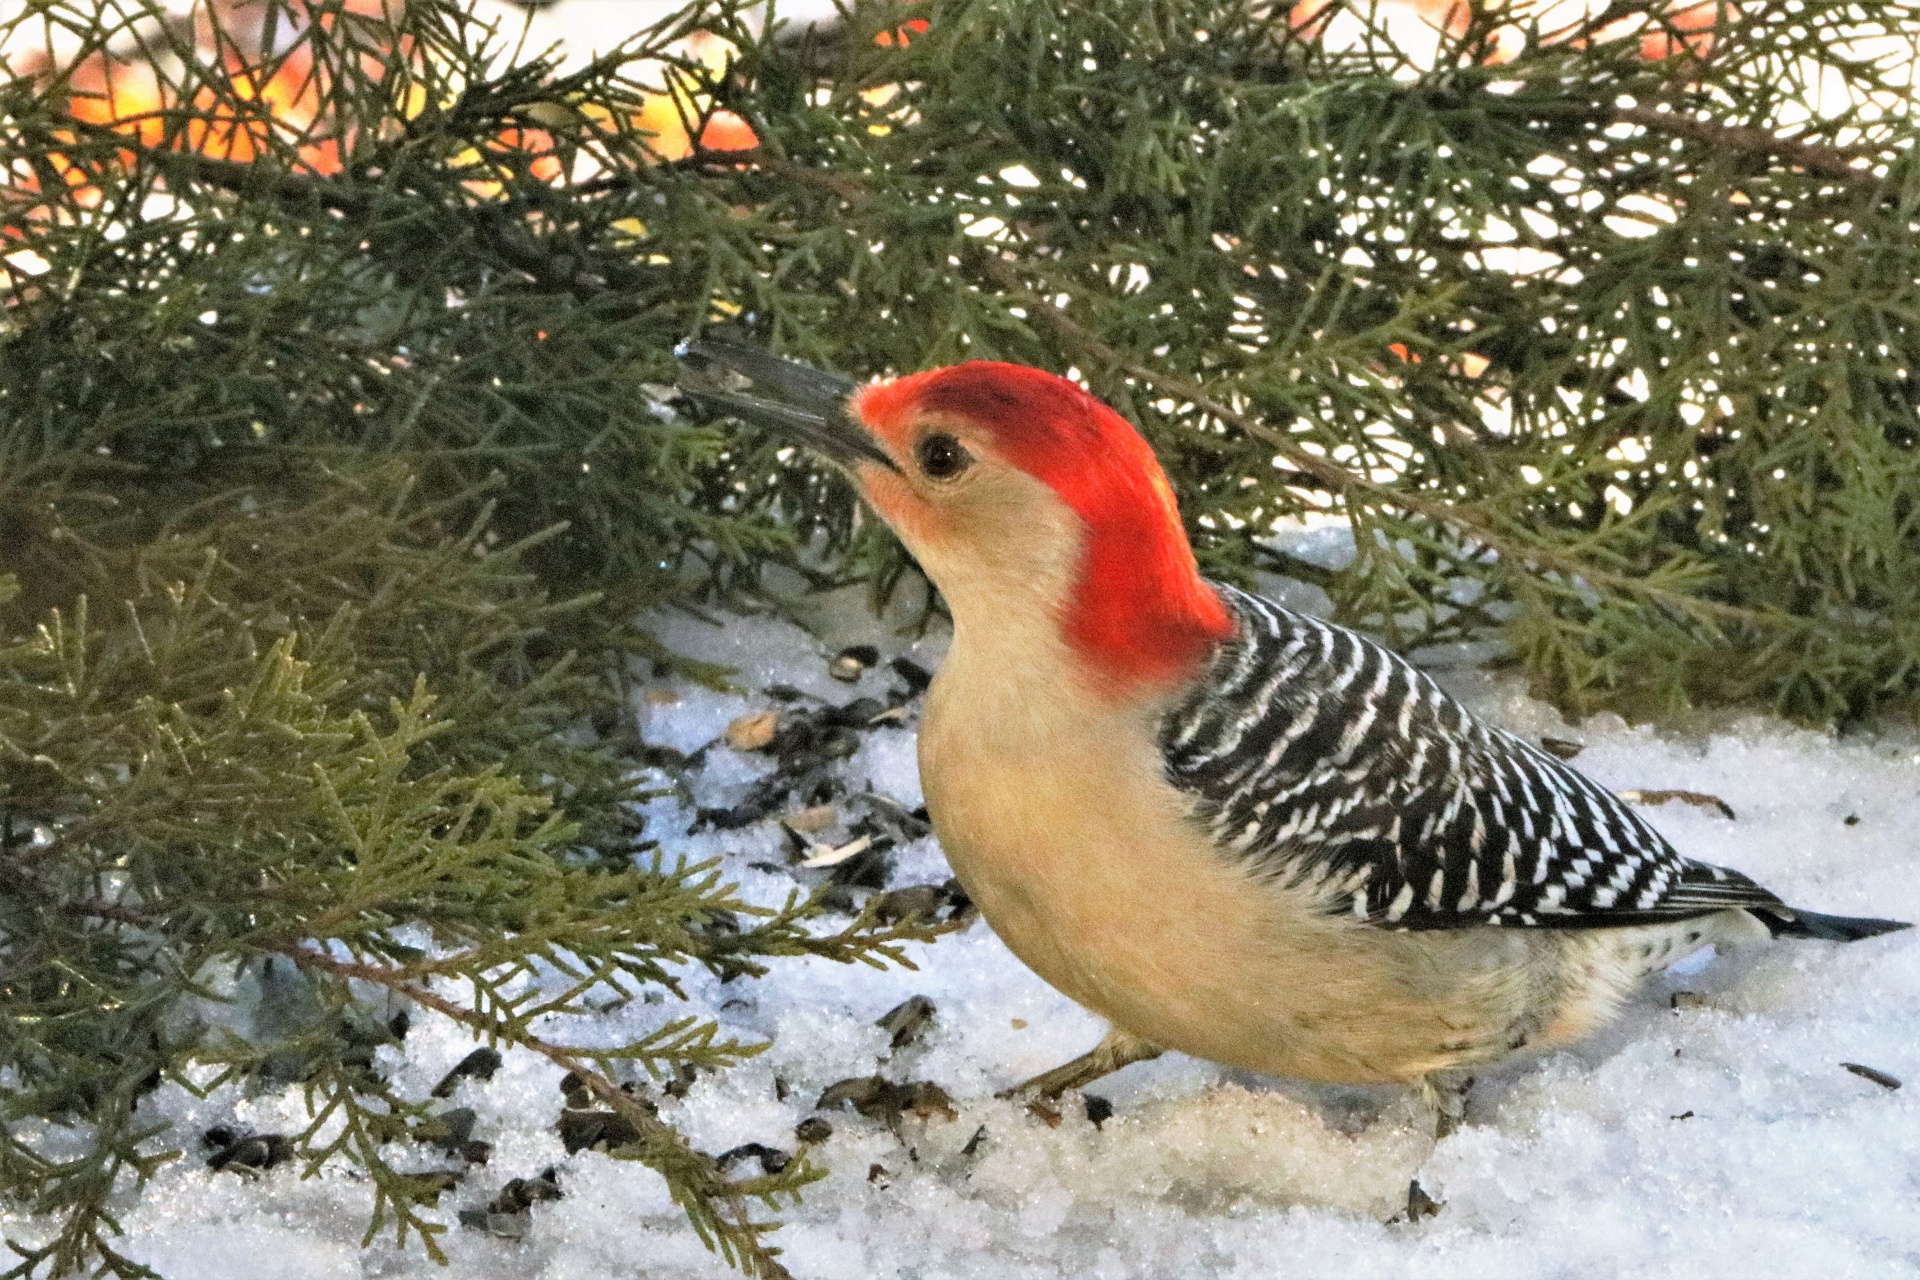 A red-bellied woodpecker is standing in snow surrounded by cedar tree branches.